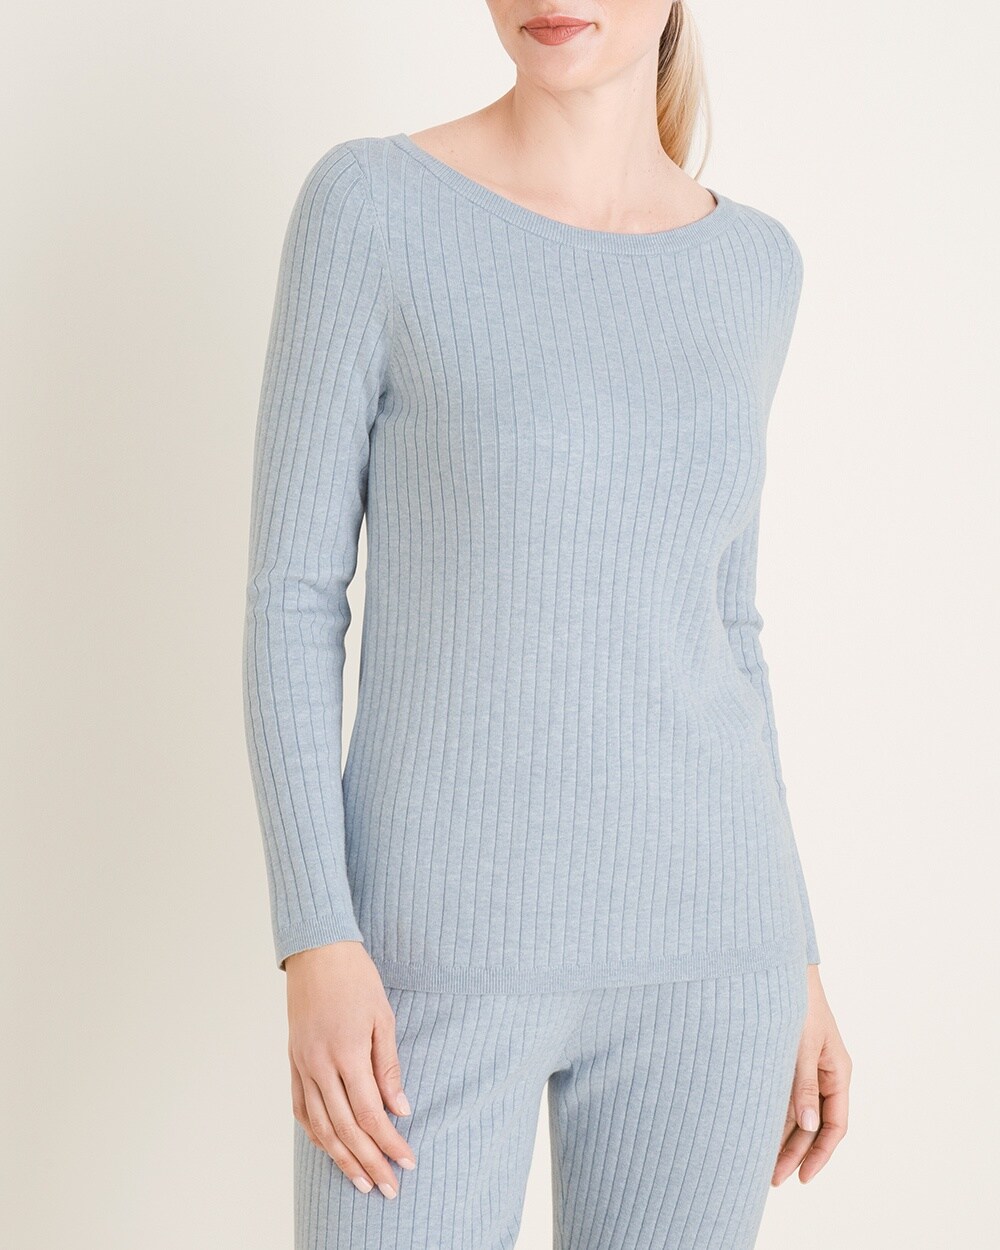 Zenergy Cotton-Cashmere Blend Ribbed Top